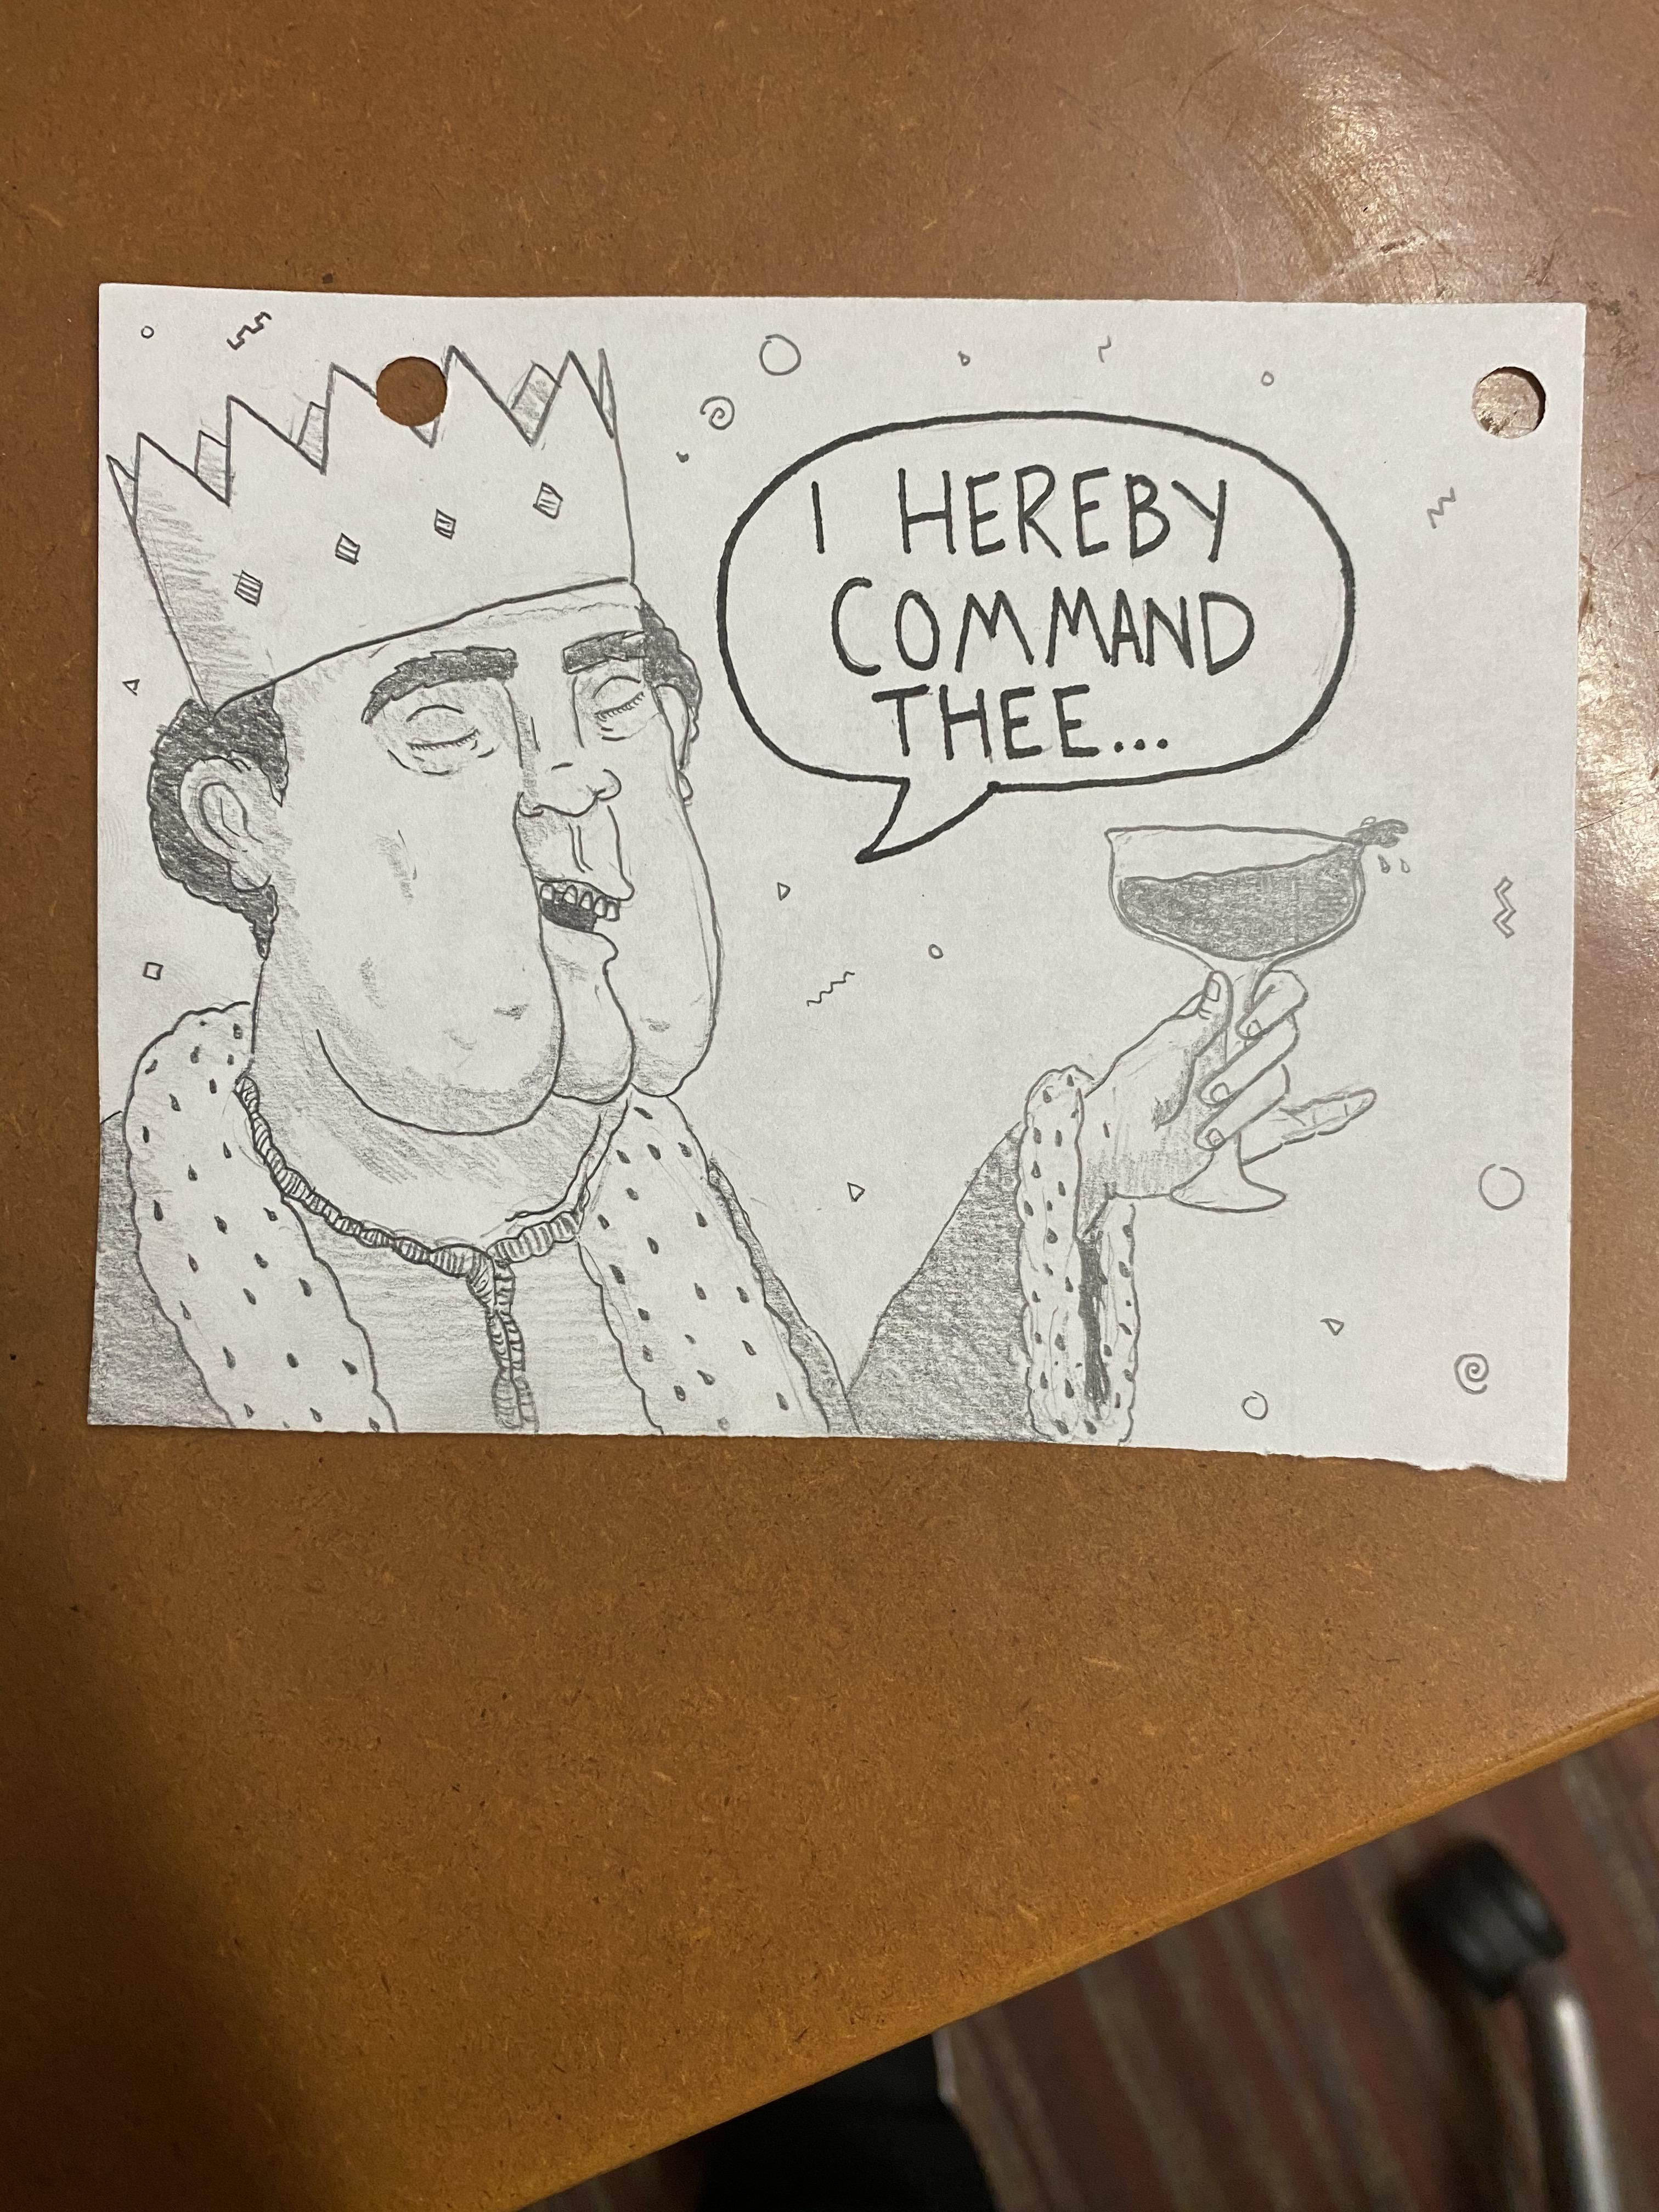 I work at a call center. Sometimes I like to draw what my callers might look like. Today I decided to draw what some of my callers think they look like.